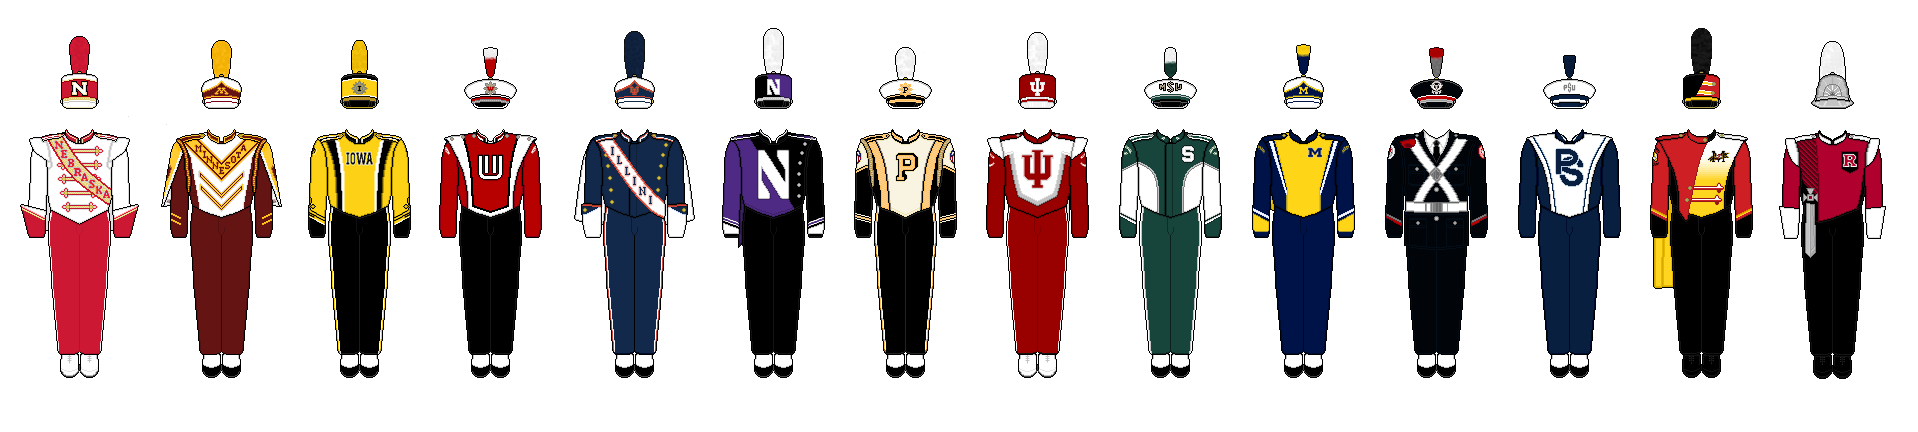 College Marching Bands Image